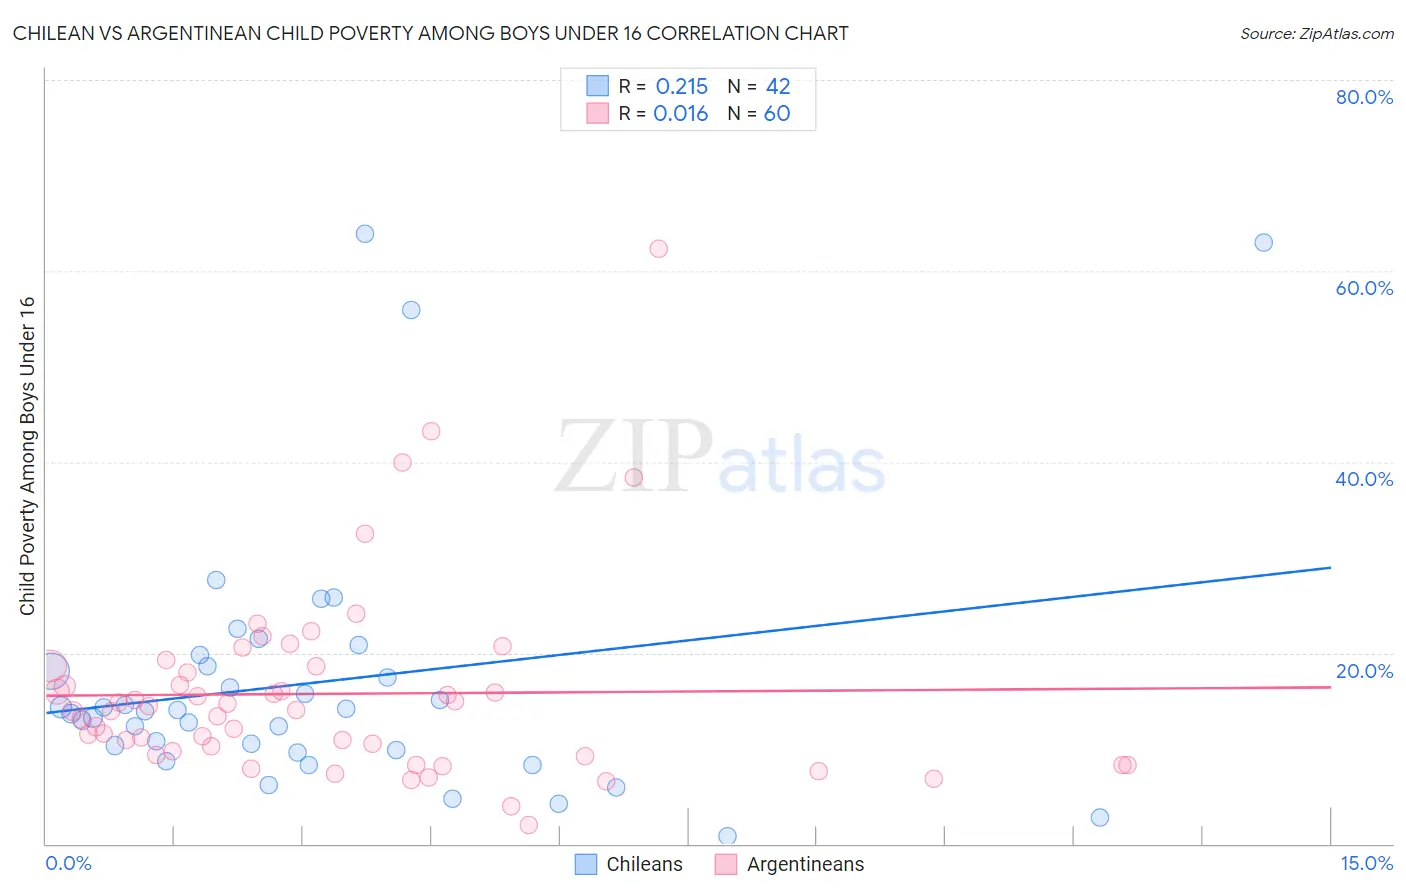 Chilean vs Argentinean Child Poverty Among Boys Under 16